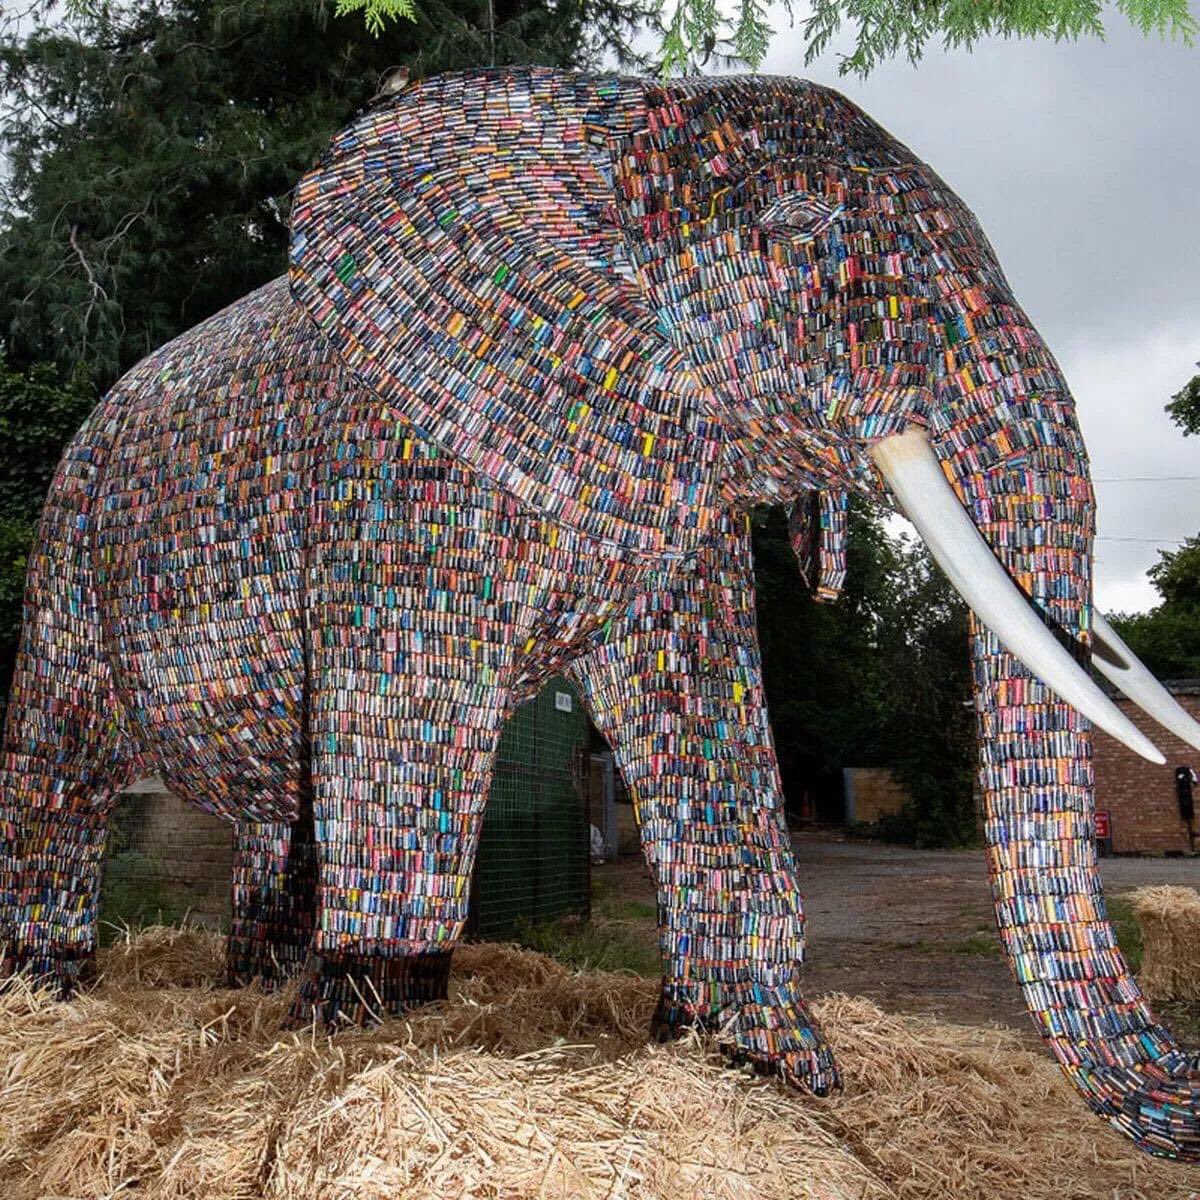 Life-sized elephant statue made from 29,649 old batteries #Animals #elephant #cuteelphant #wildlife